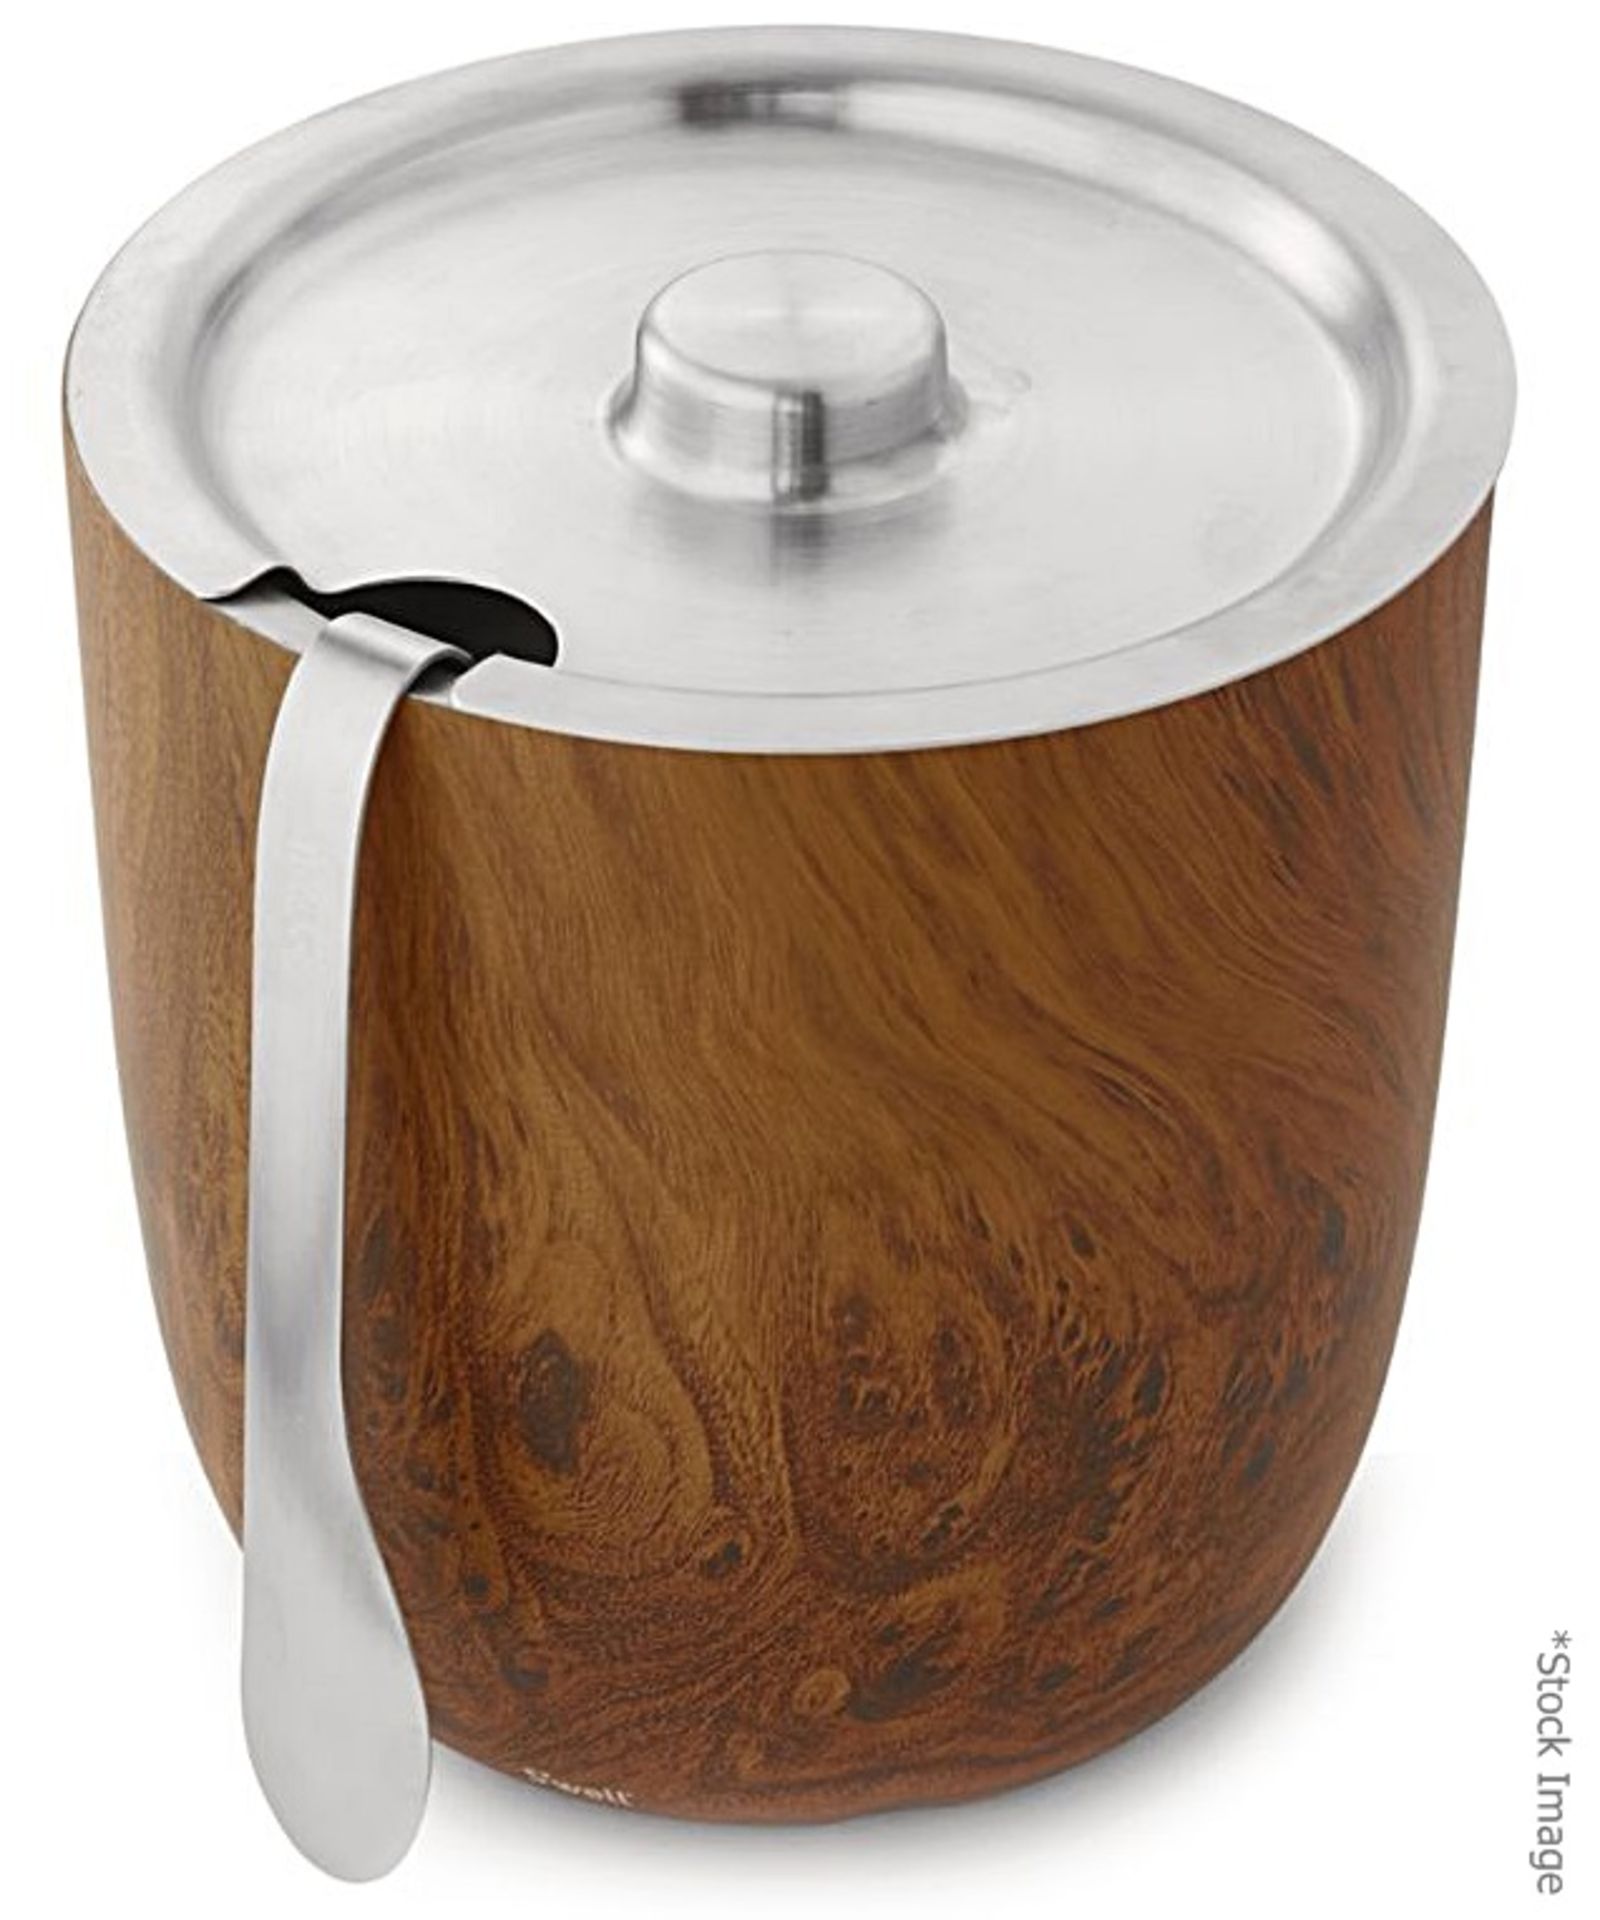 1 x S'WELL Designer Ice Bucket With Teakwood Effect Finish - Includes Tongs - Original Price £50.